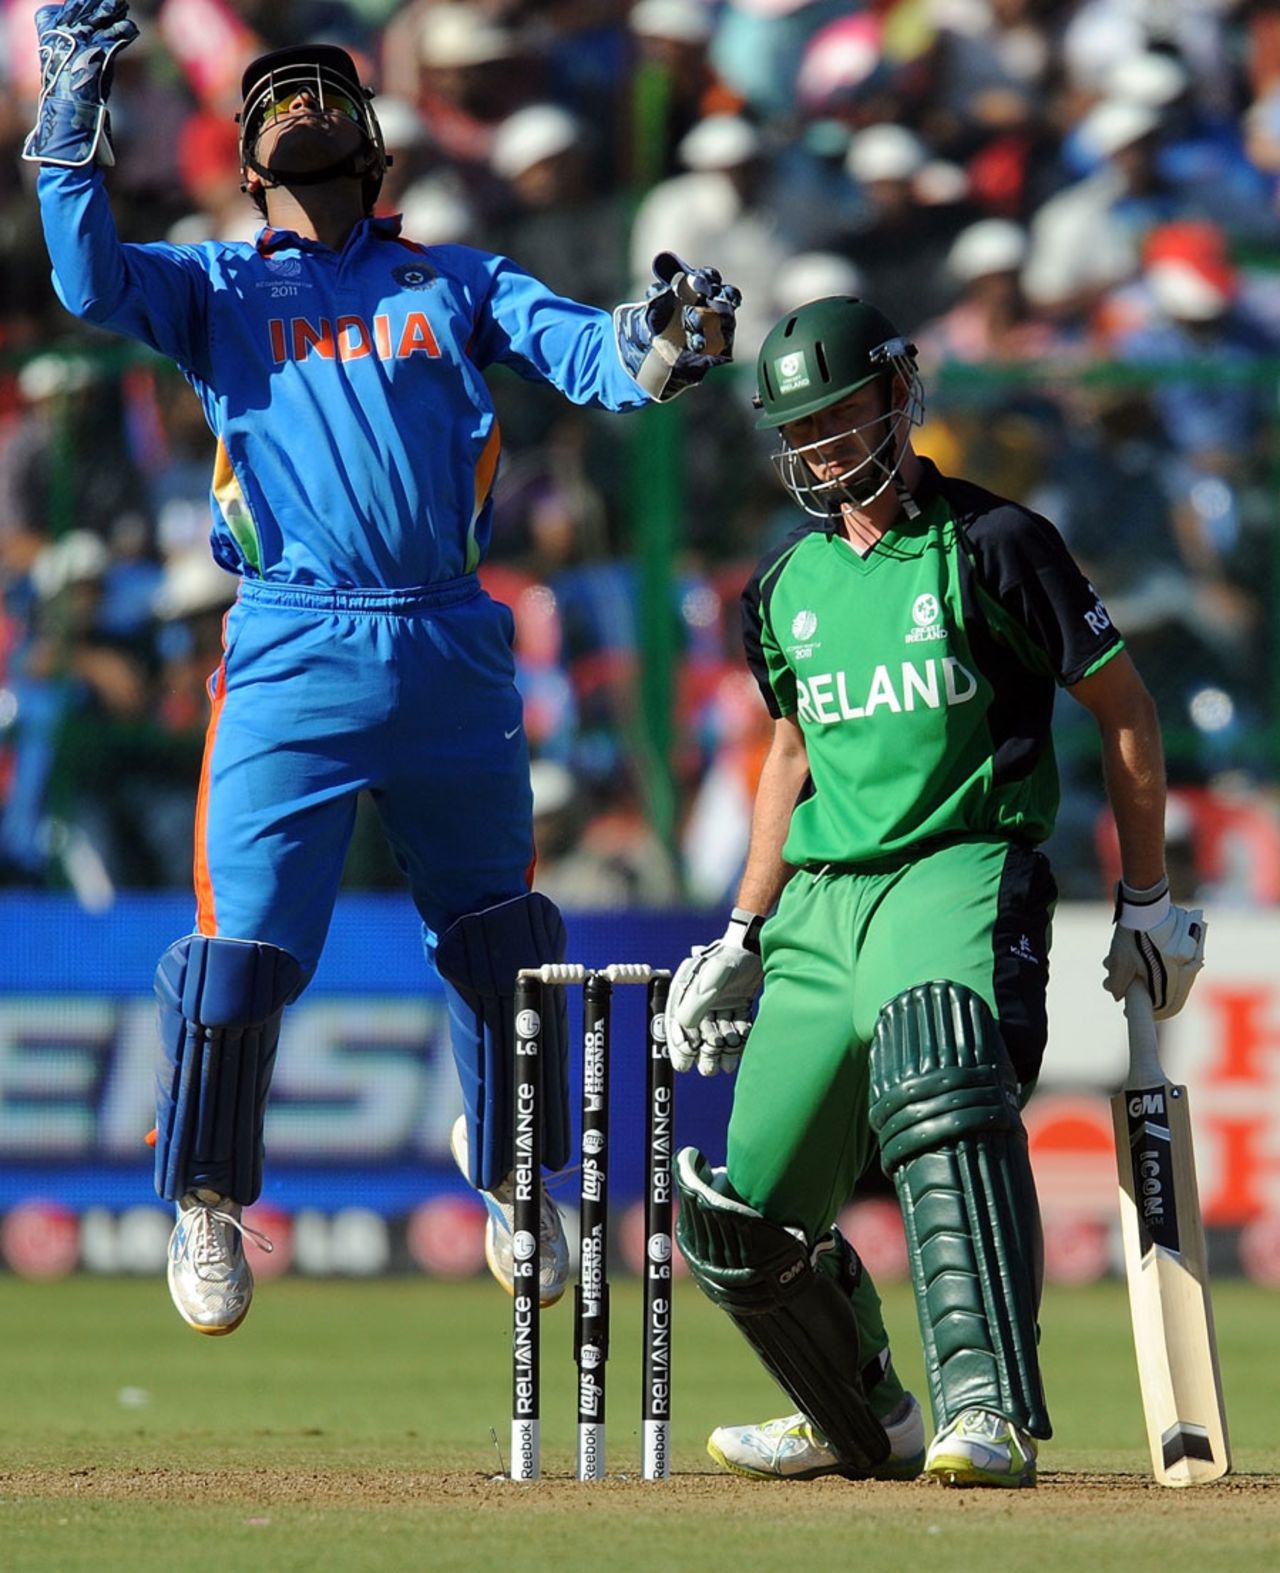 MS Dhoni is delighted after catching Andrew White off Yuvraj Singh, India v Ireland, Group B, World Cup 2011, Bangalore, March 6, 2011